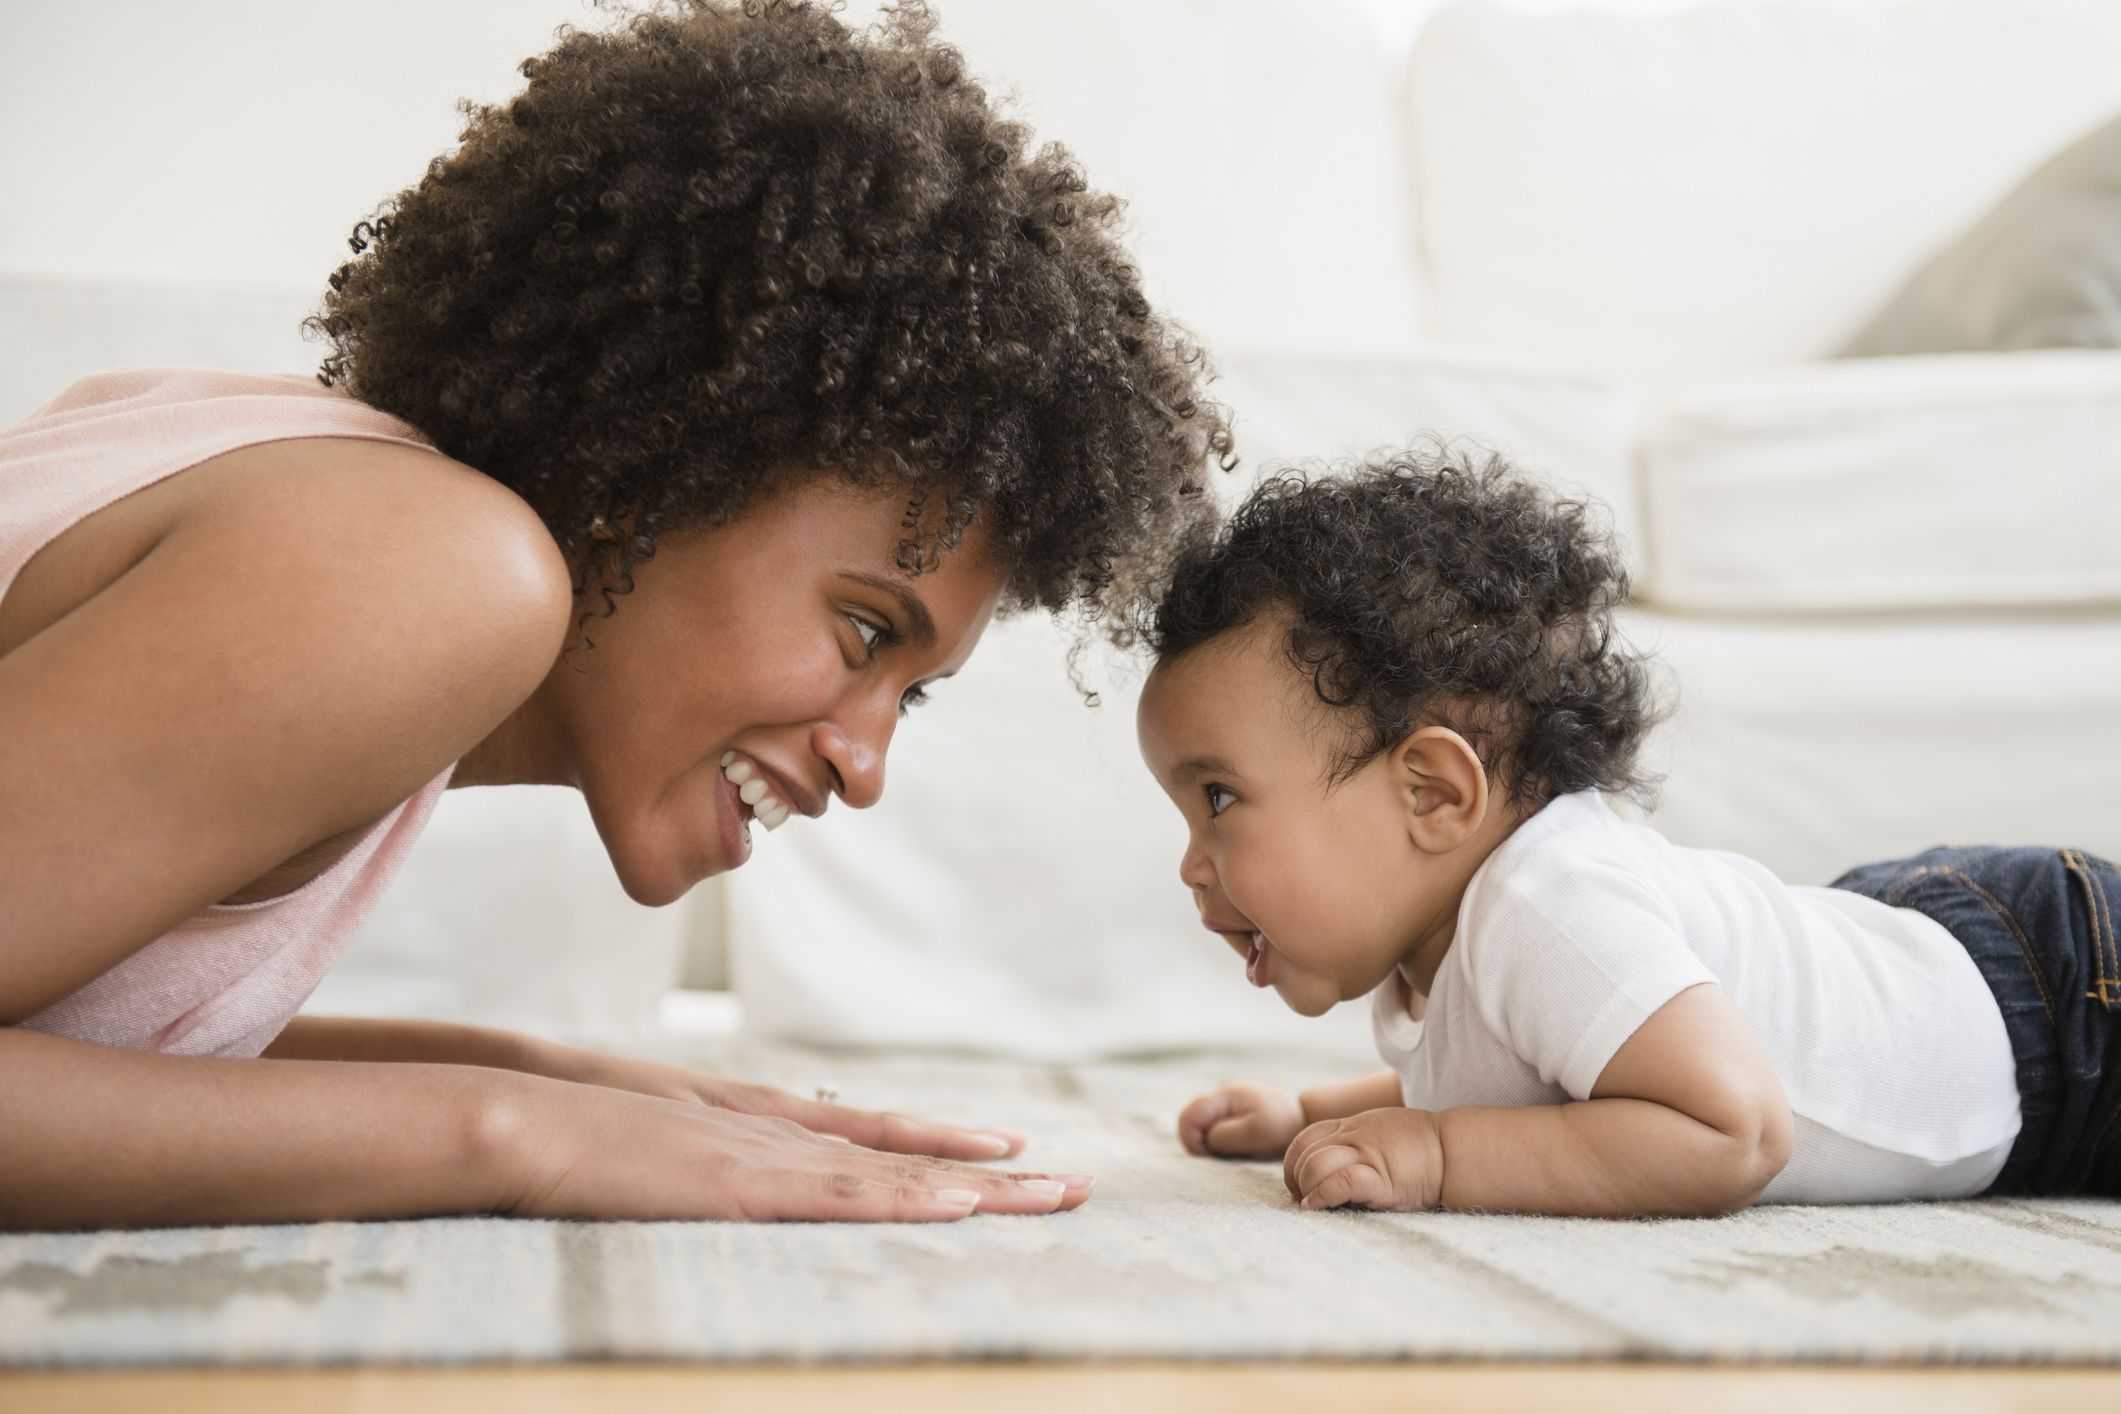 Tummy time: benefits and how to do it